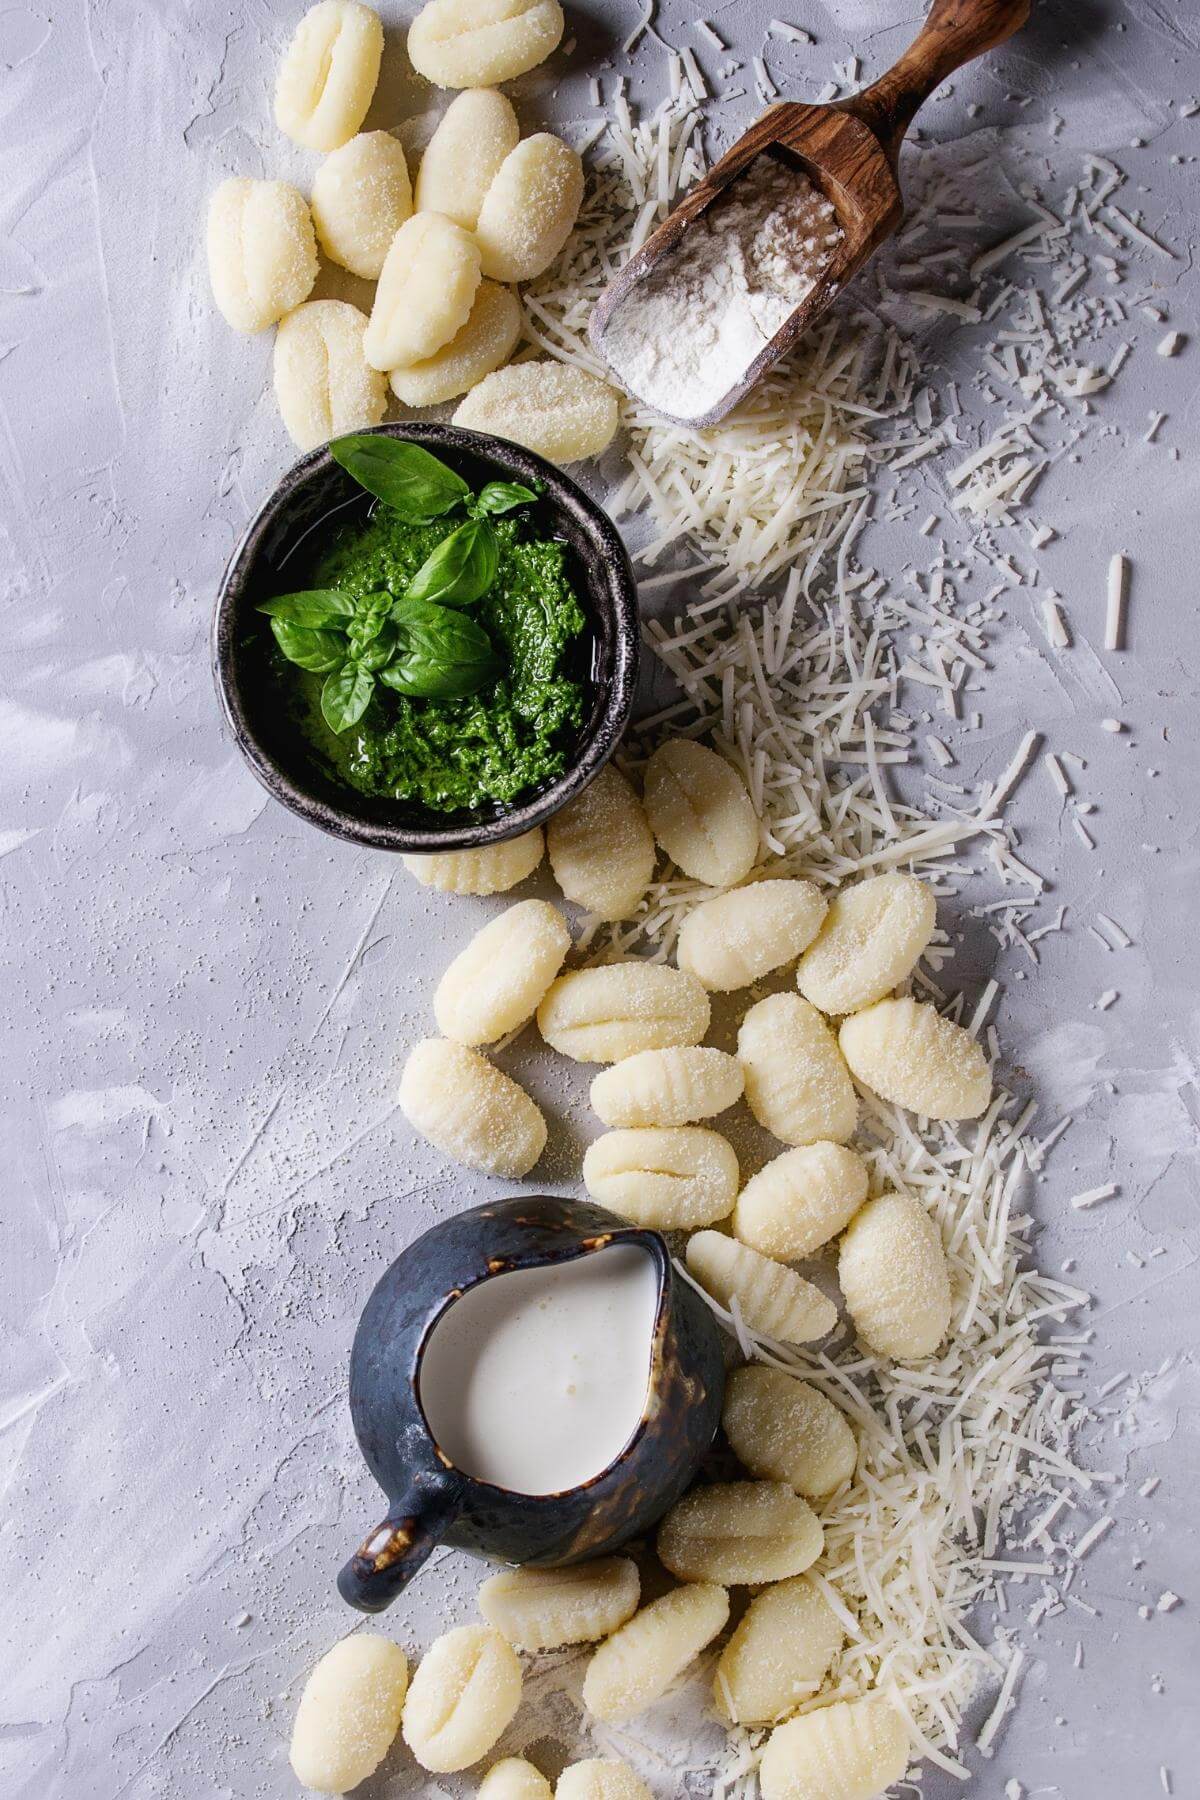 Gnocchi scatter around on a light blue background with basil, milk, and cheese.